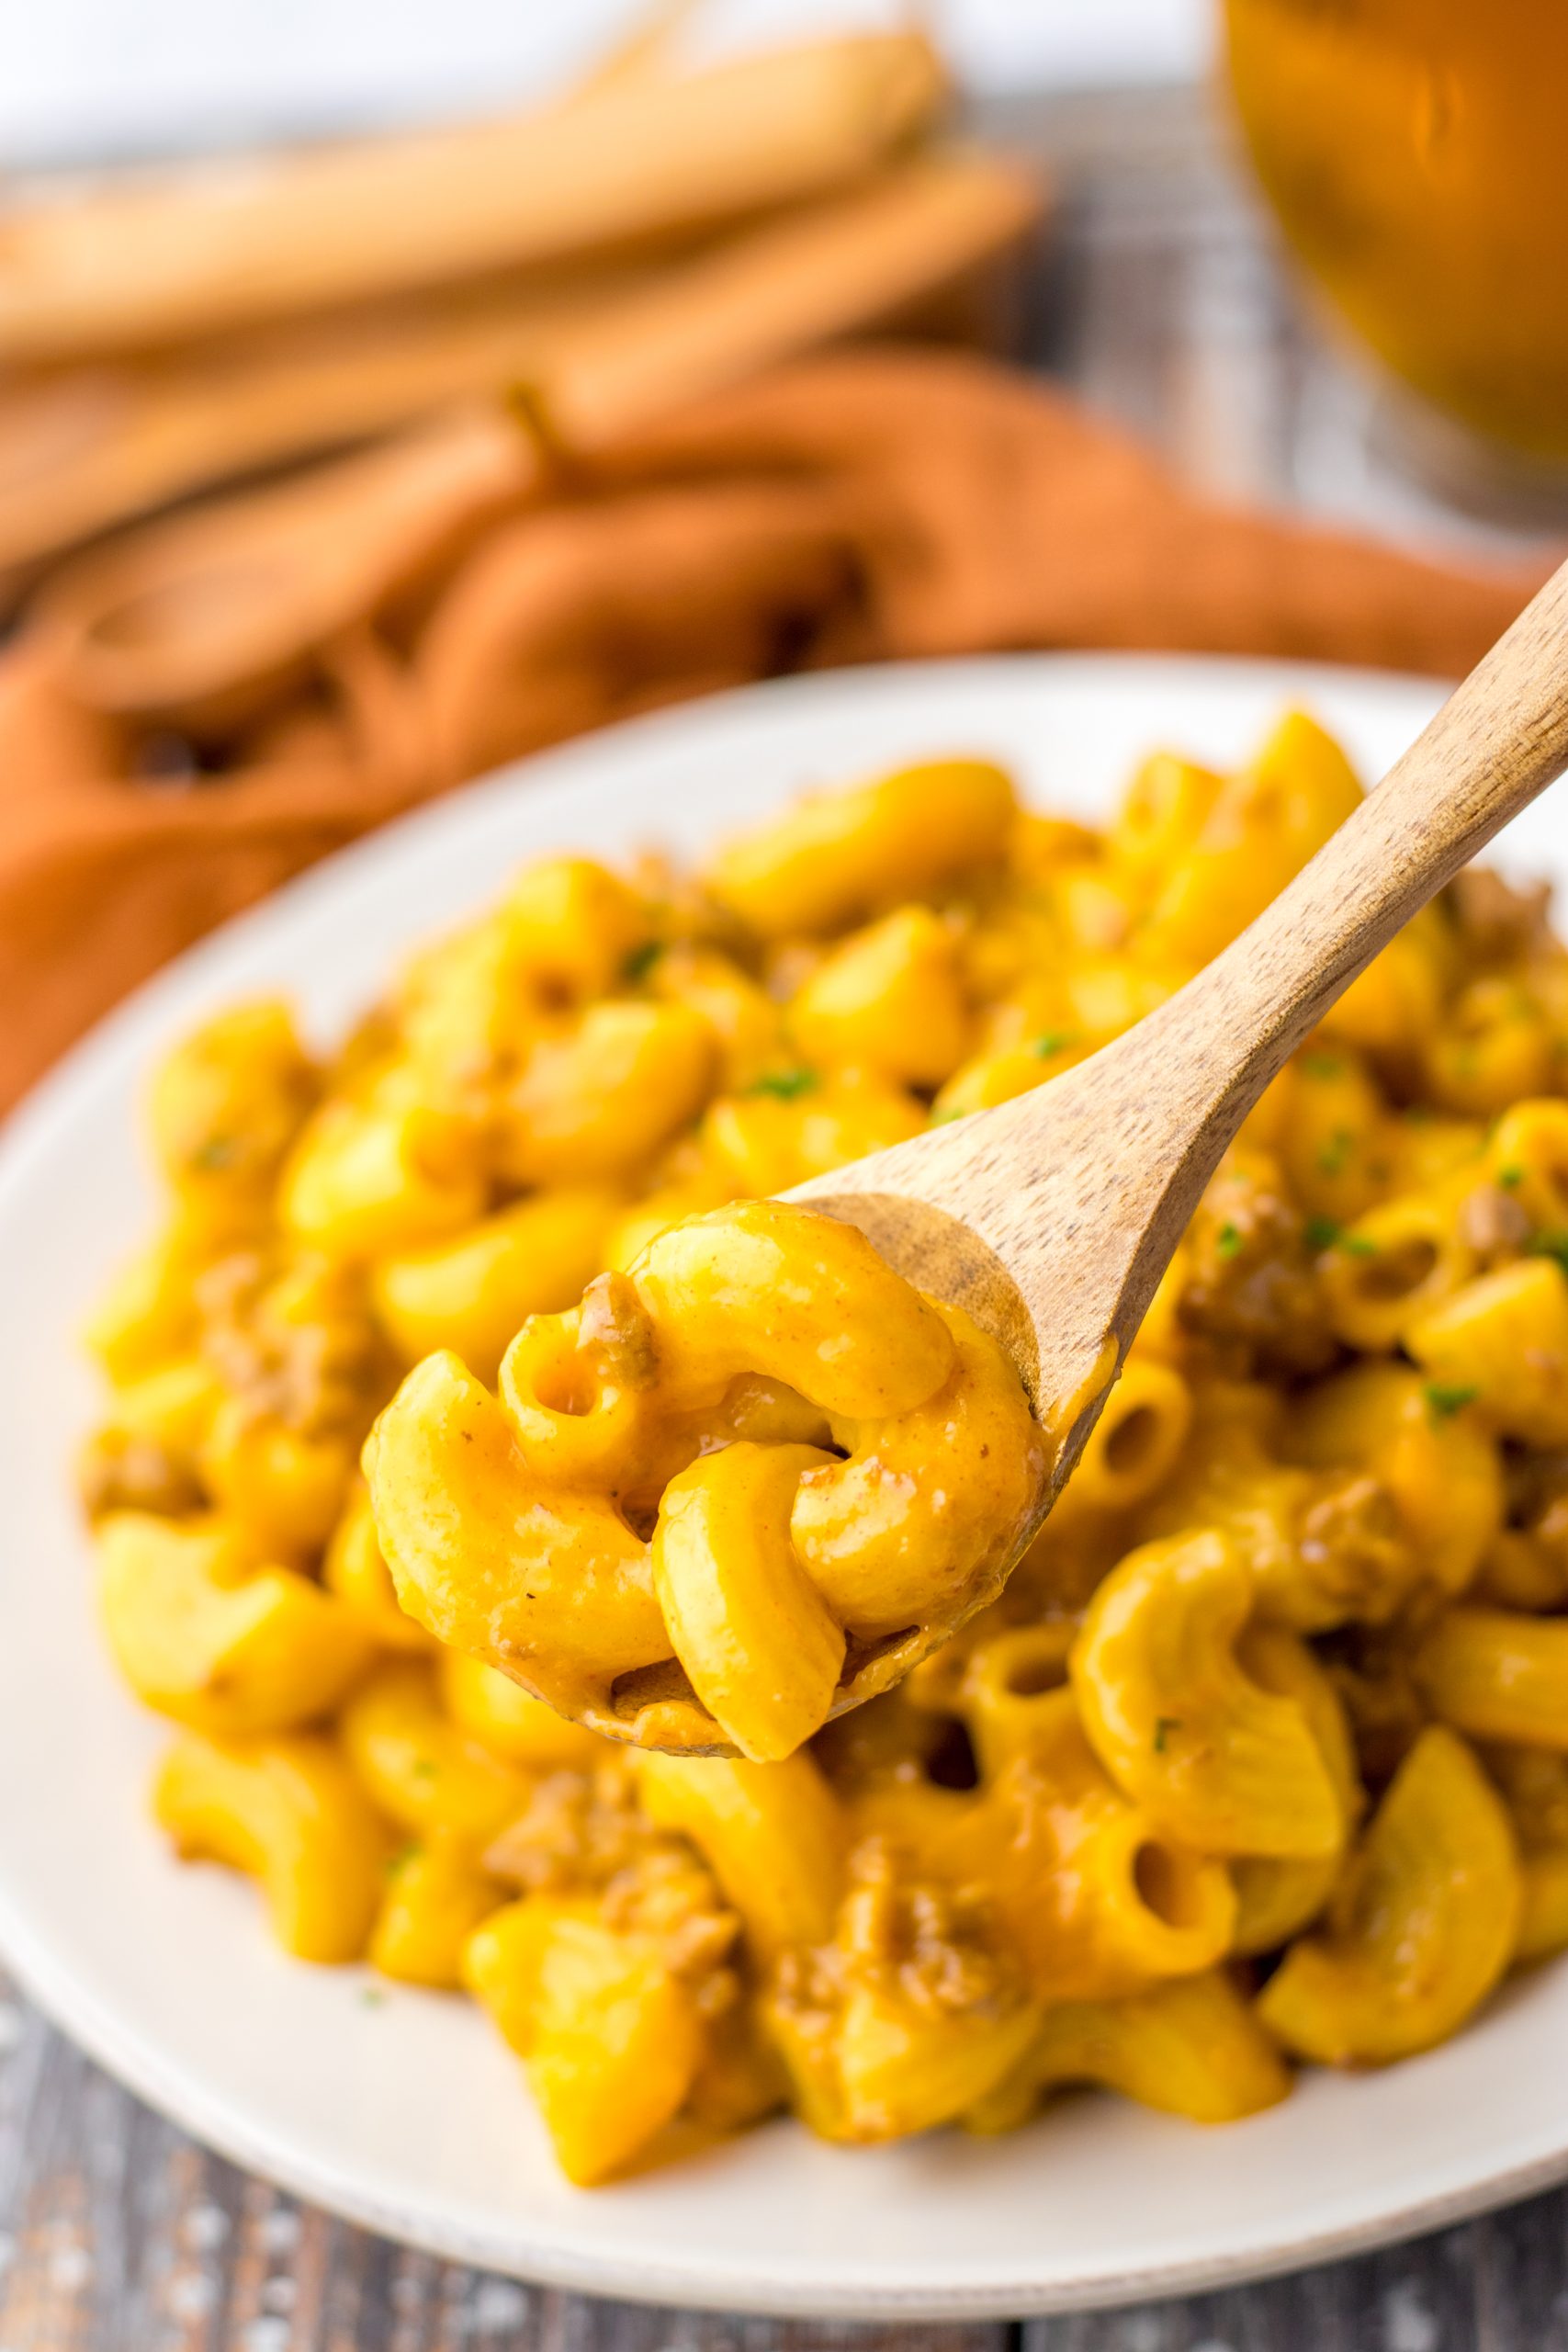 Macaroni and cheese in a bowl with a wooden spoon.